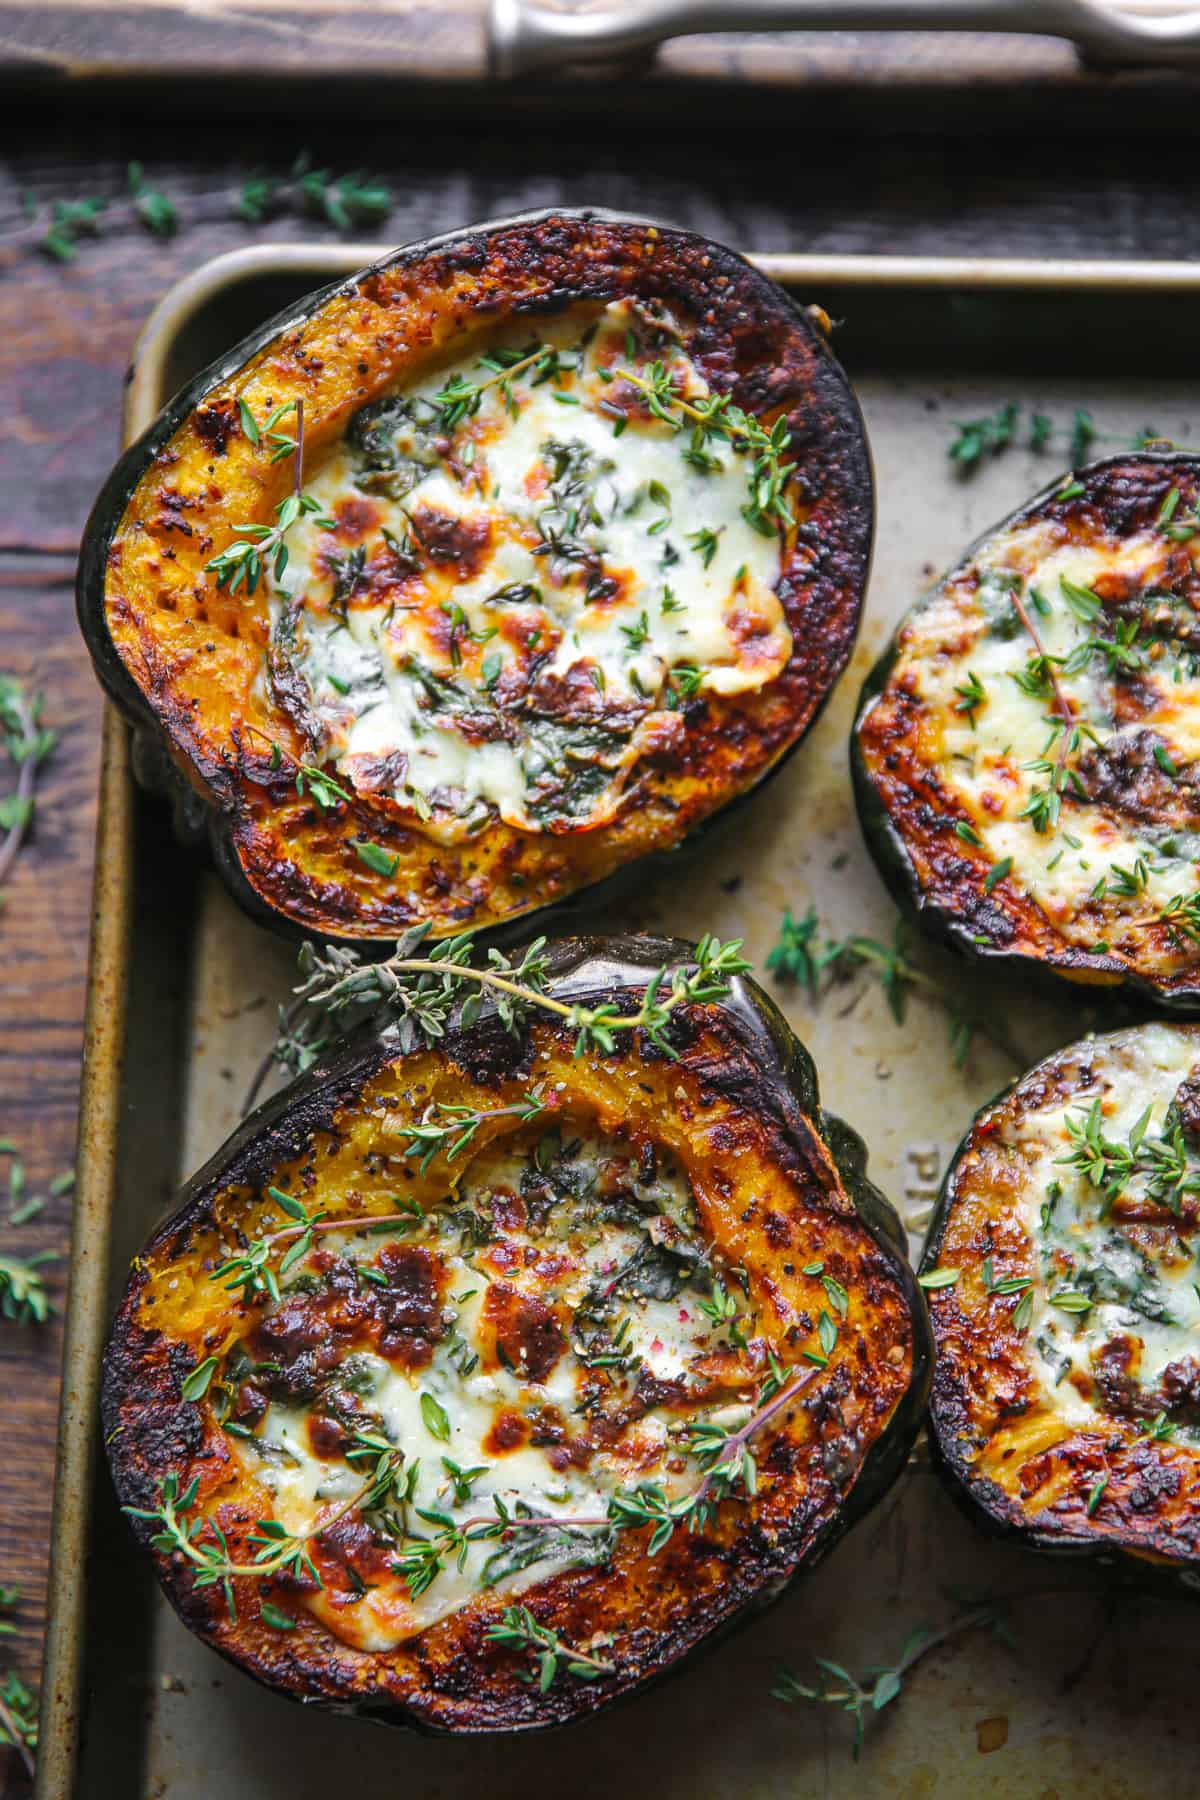 roasted acorn squash halves stuffed with spinach and cheese mixture on a baking sheet